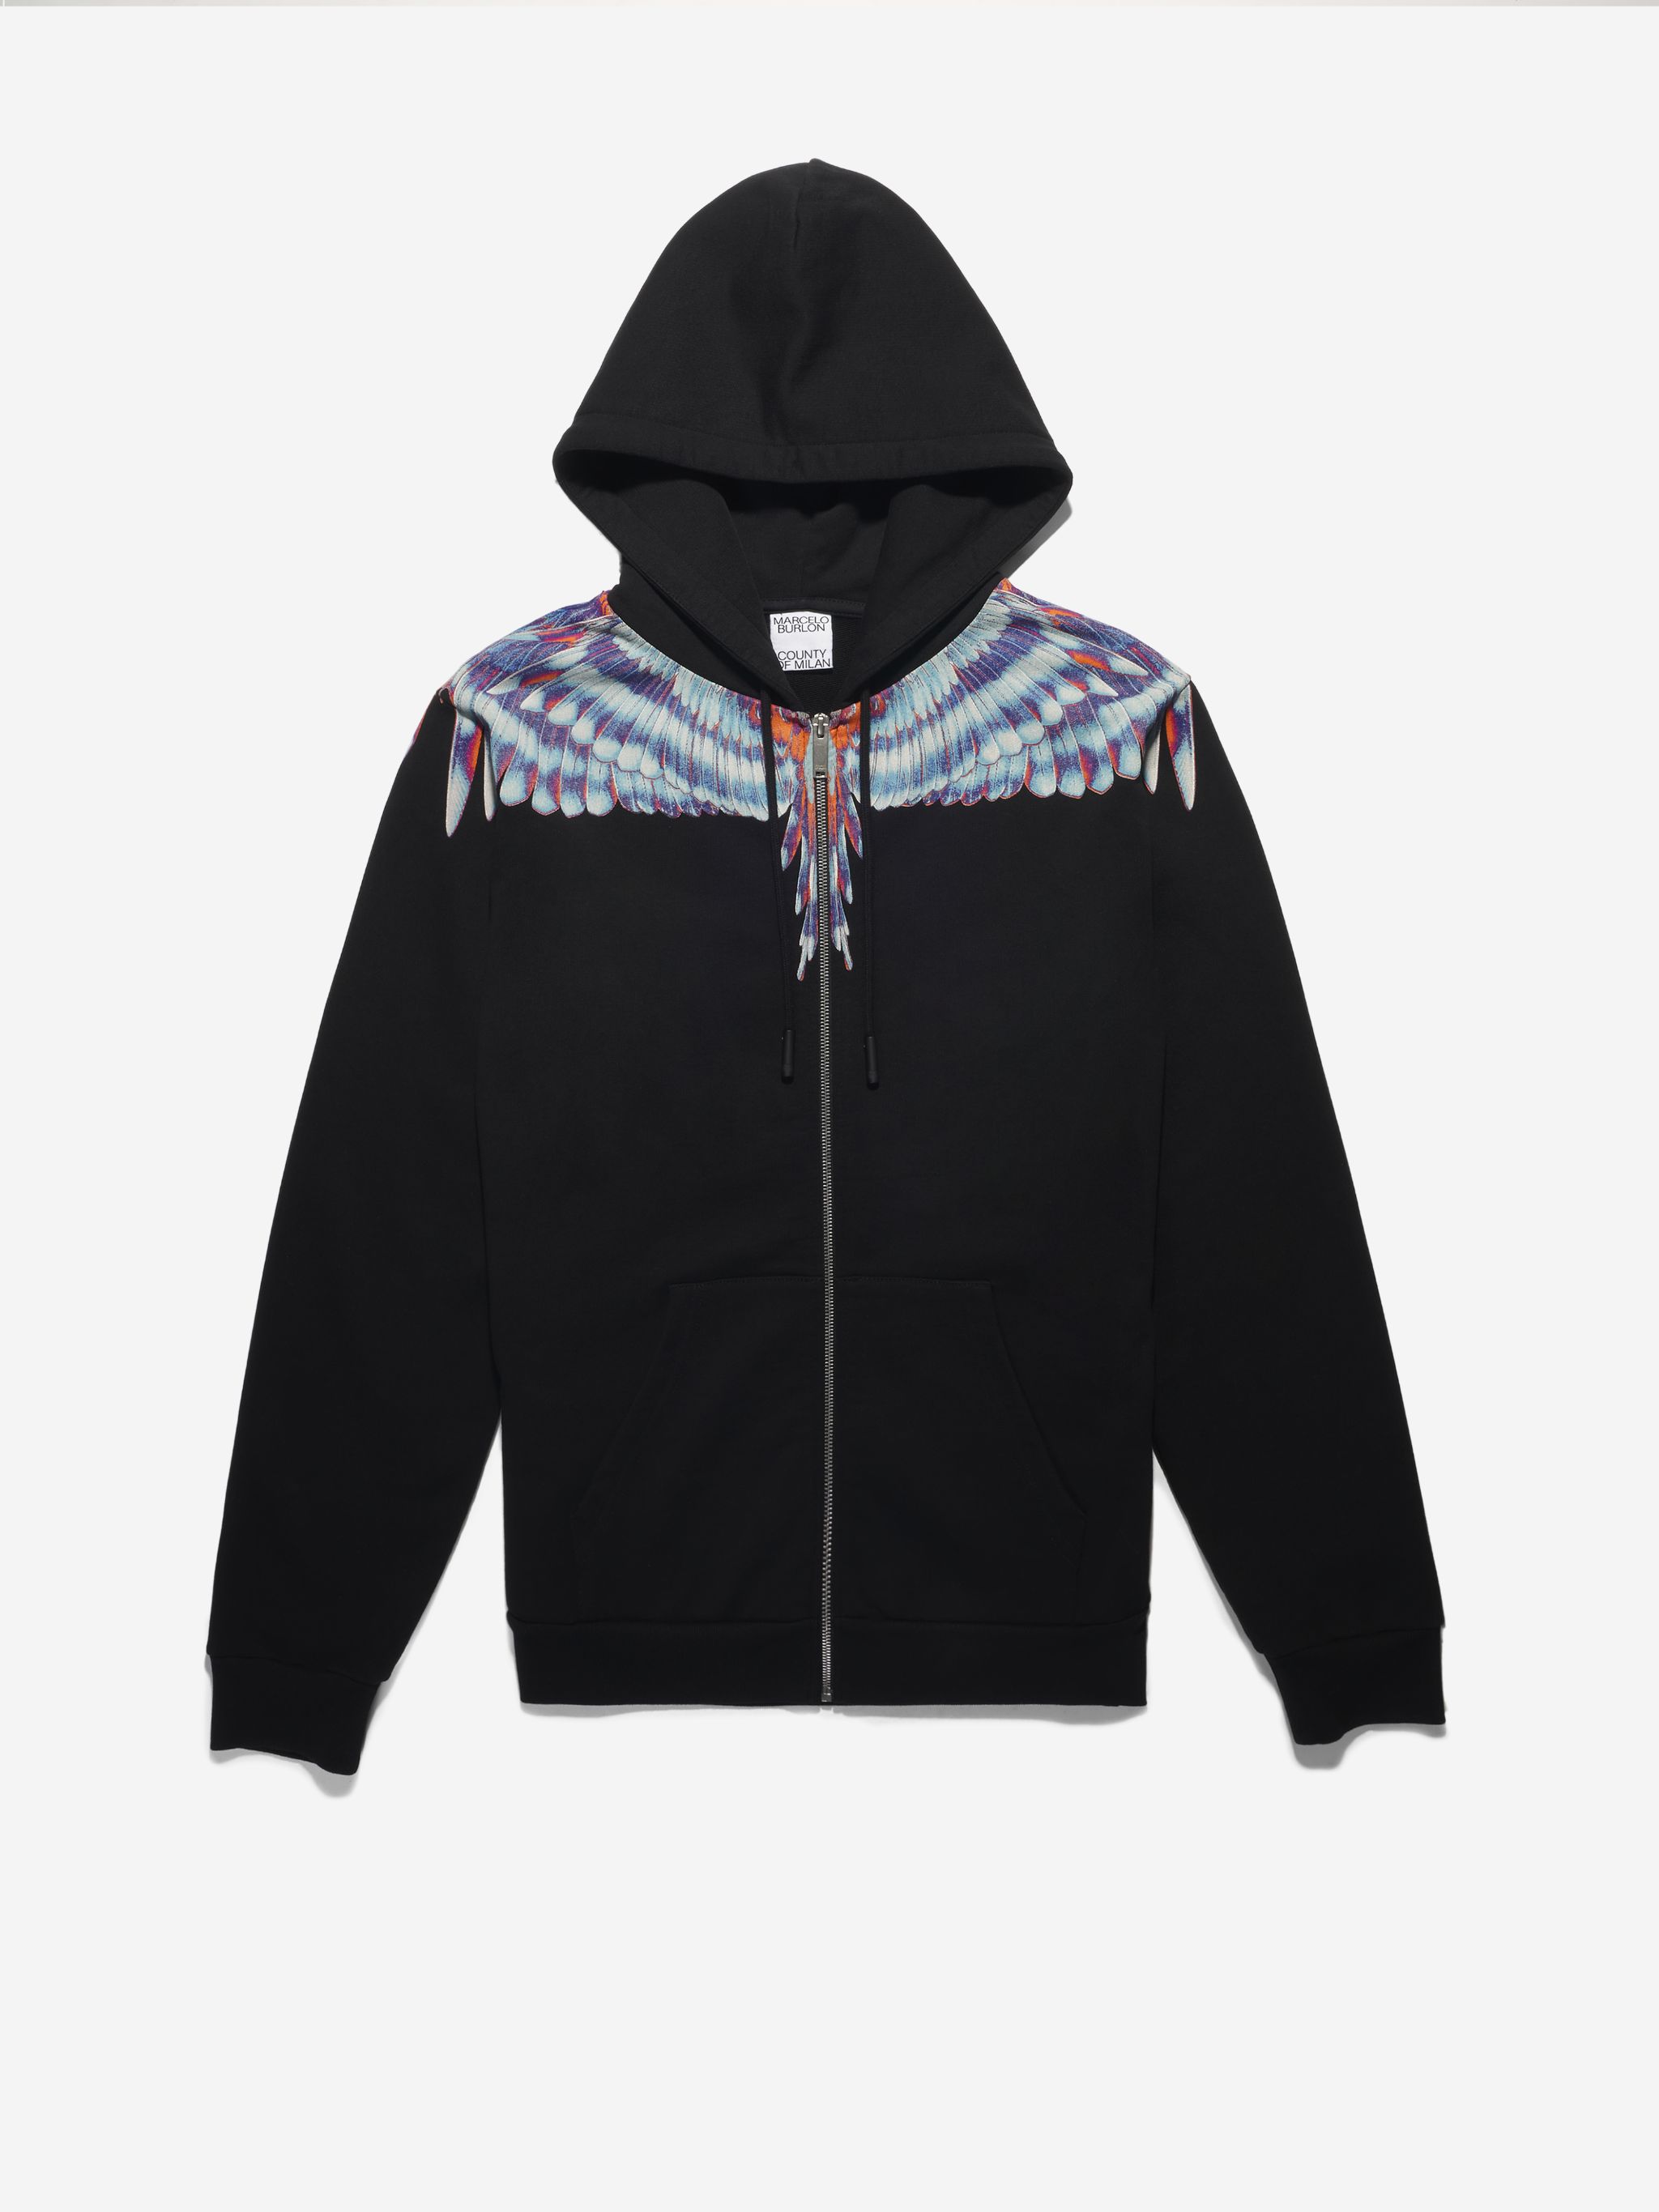 Black/multicolour cotton Wings-print zip-up hoodie from Marcelo Burlon County of Milan featuring drawstring hood, wings print, front zip fastening, long sleeves and two front pouch pockets.